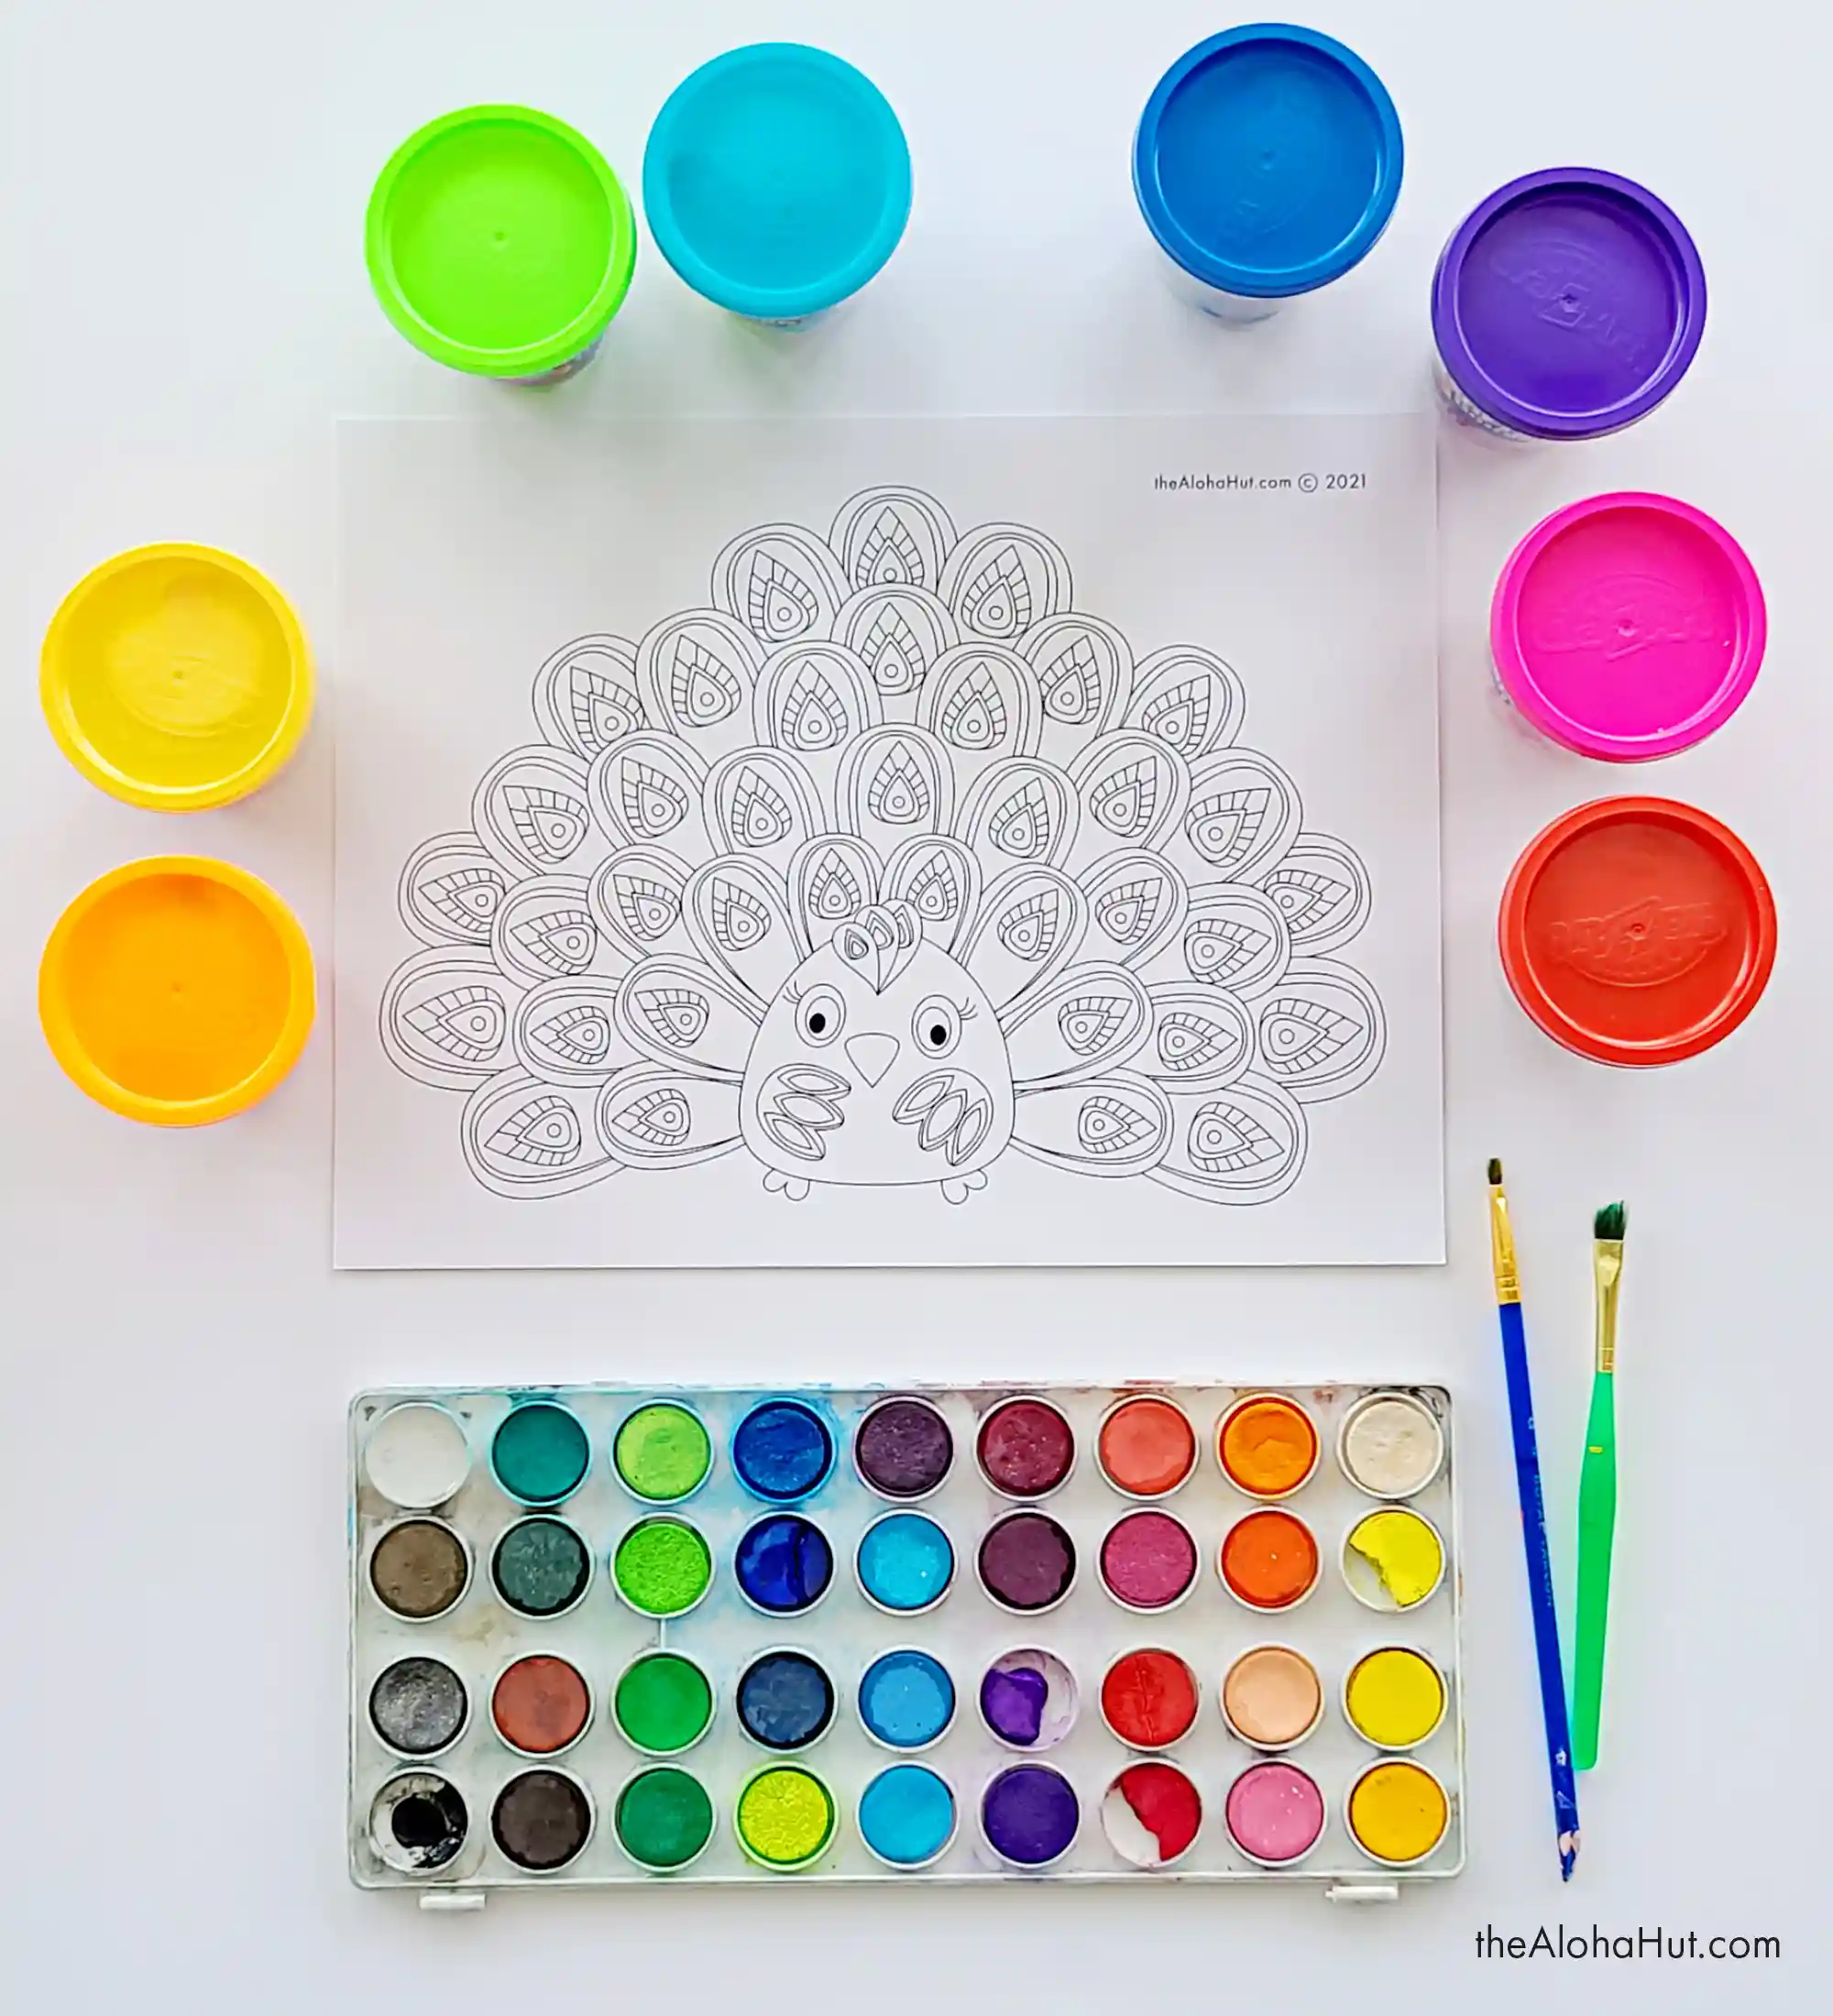 Peacock Coloring Page - Mixed Media Art Activity for Kids